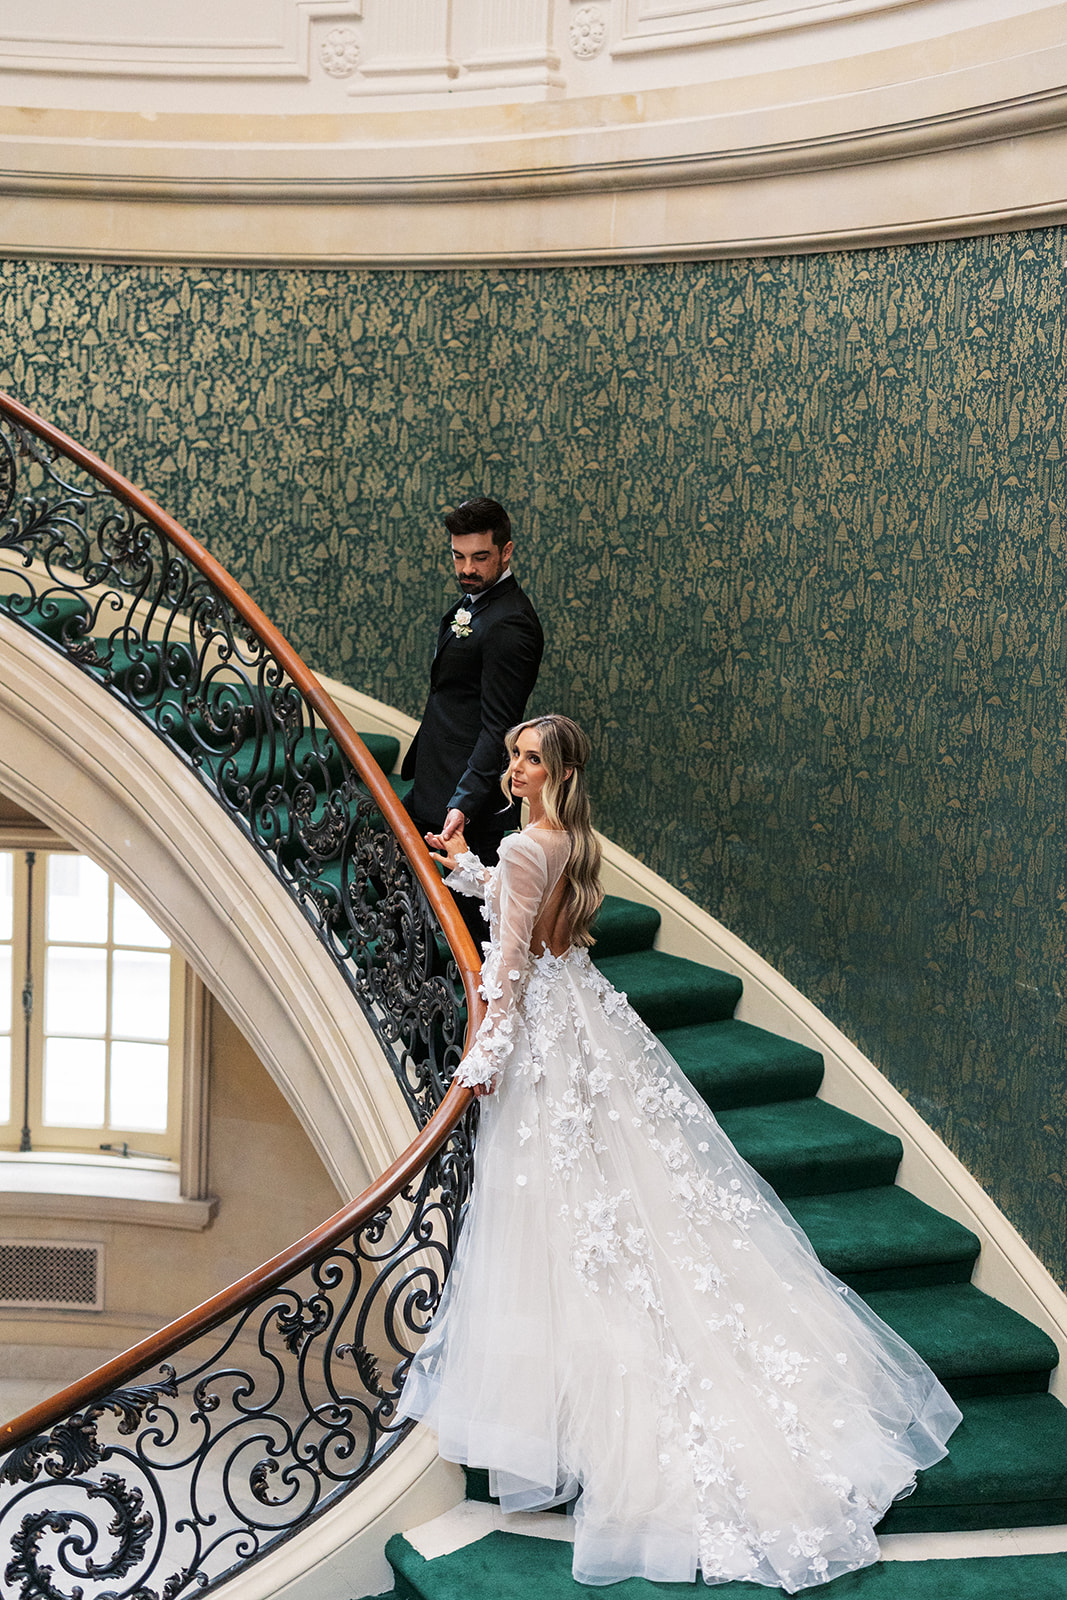 Newlyweds walk up a grand staircase with green carpet in the Elkins Estate